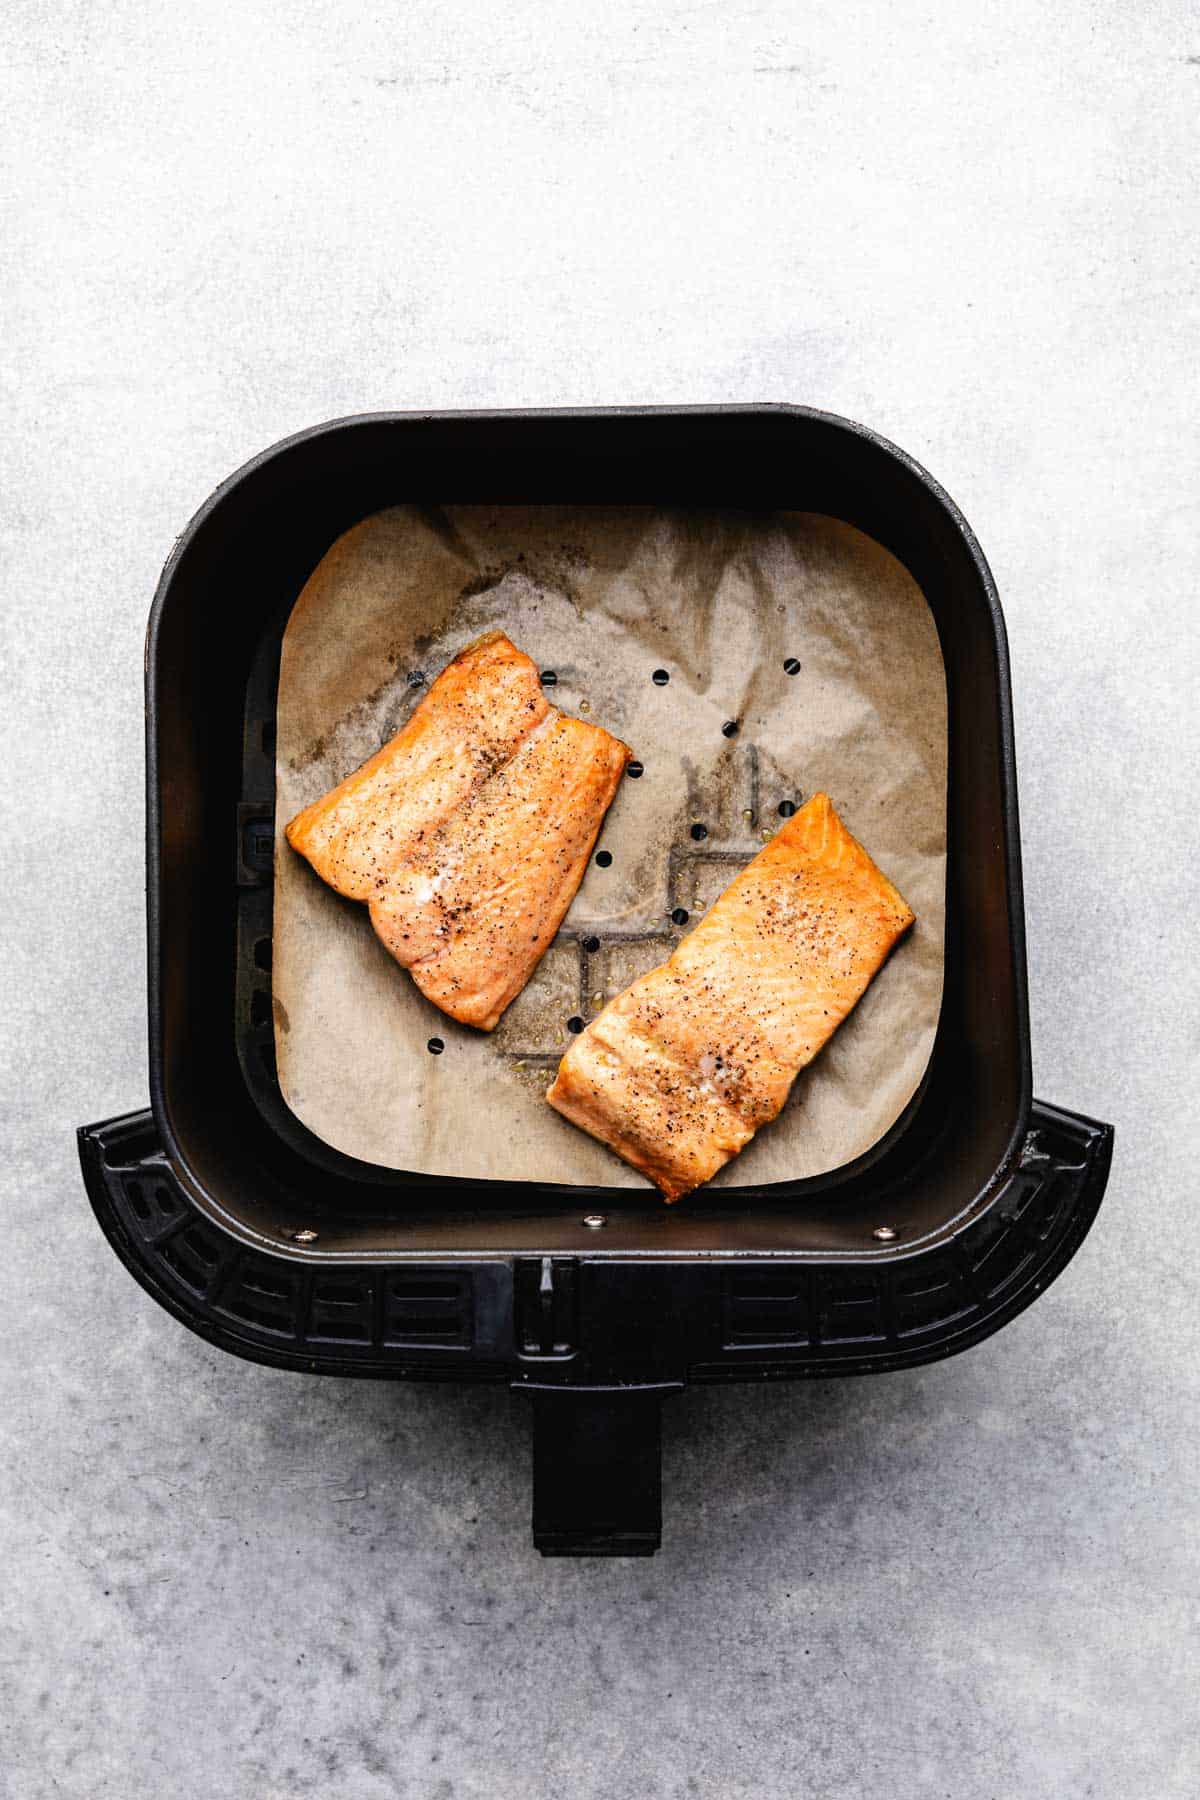 Two pieces of fresh salmon in an air fryer basket.